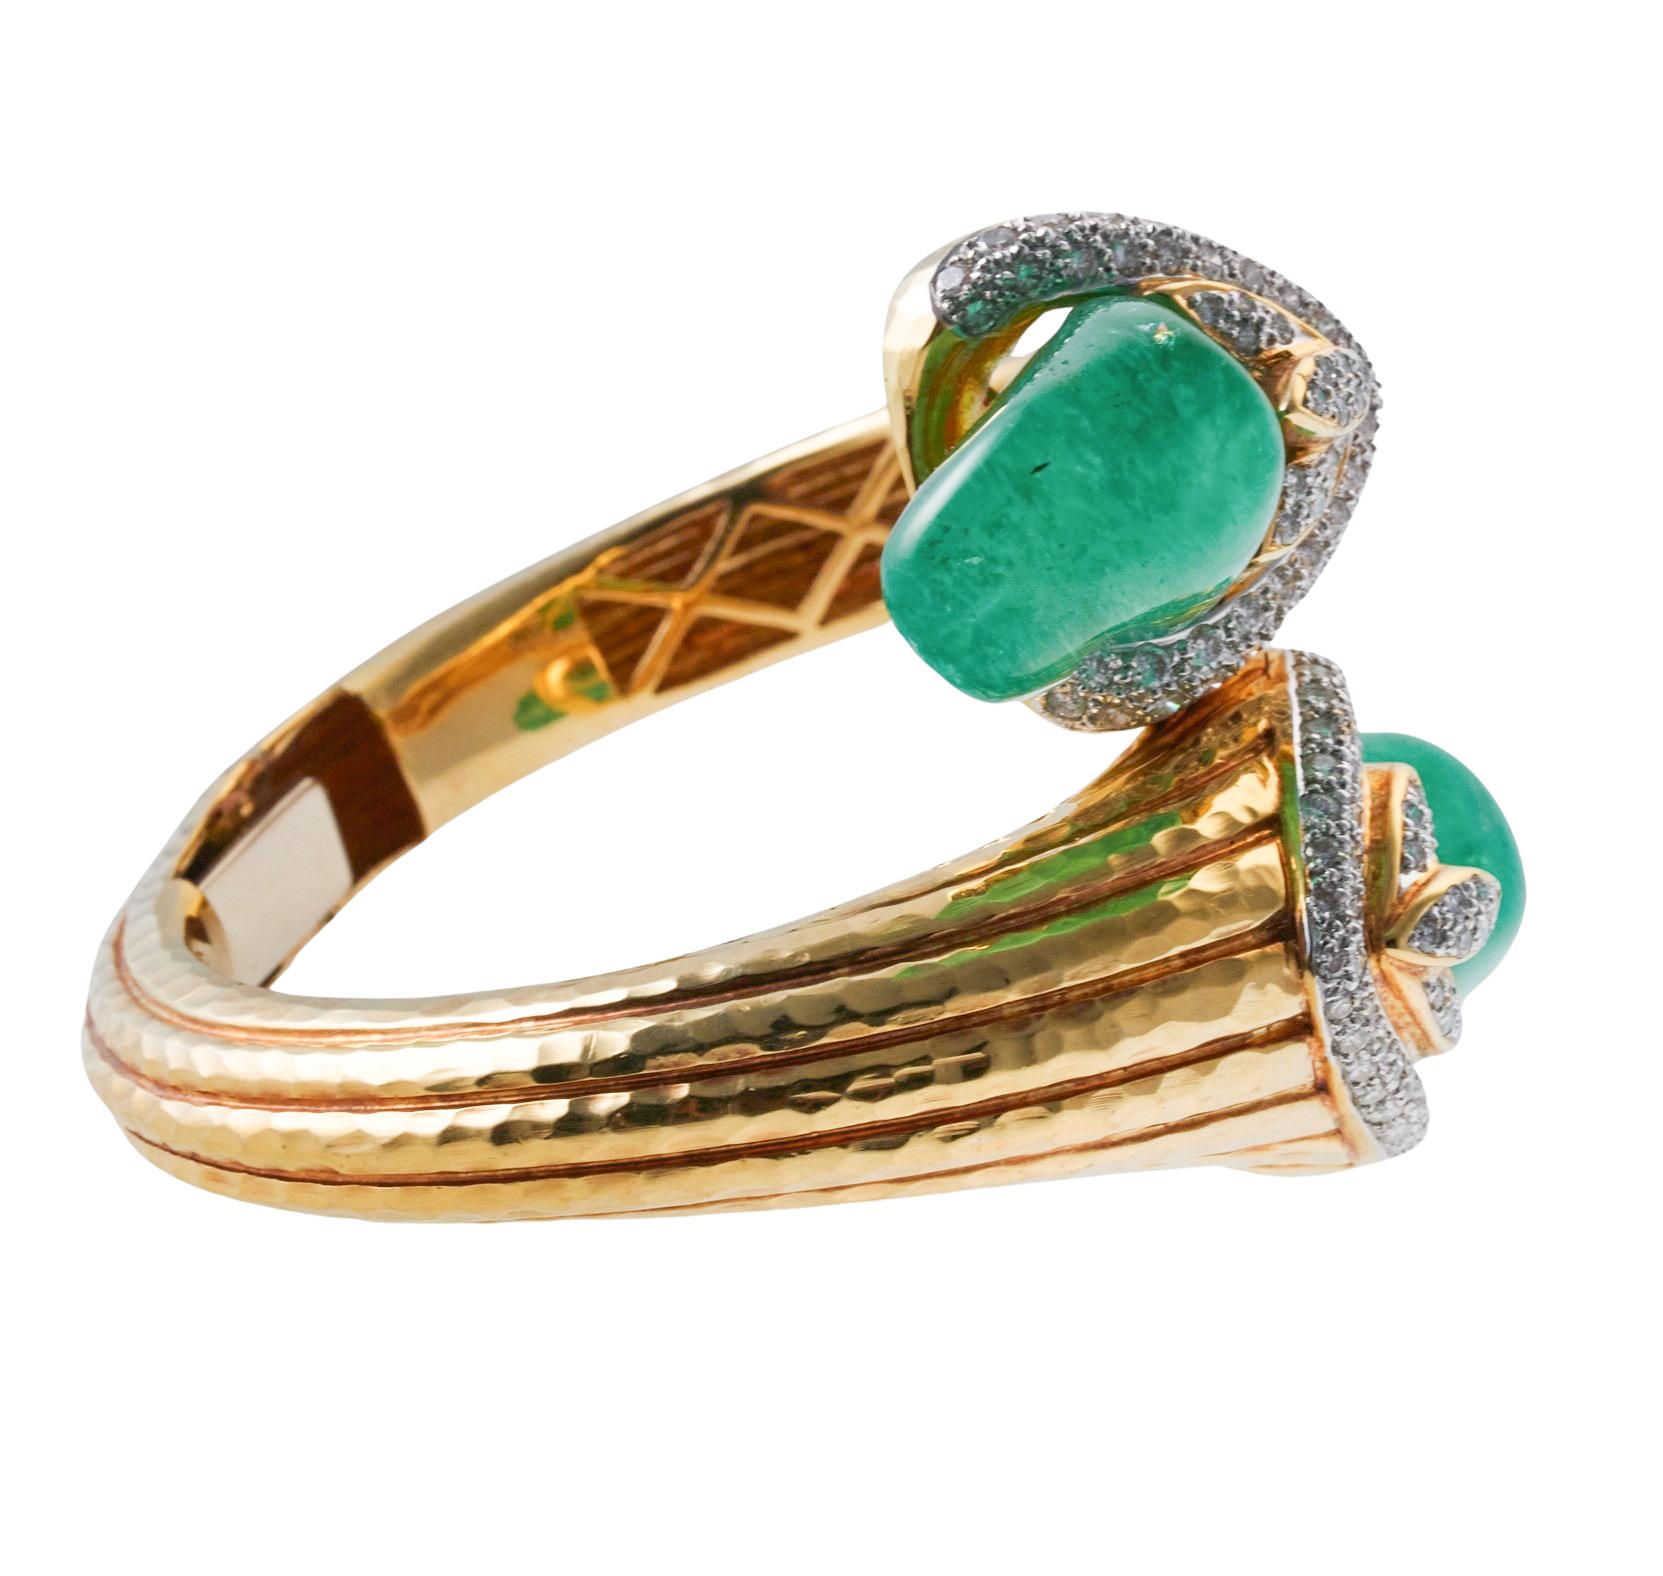 Impressive 18k gold bypass bangle bracelet, set with two polished emerald cabochons on each end, measuring approx. 23mm x 15mm, surrounded with approx. 0.60ctw H/SI diamonds. The bracelet will fit an approx. 7